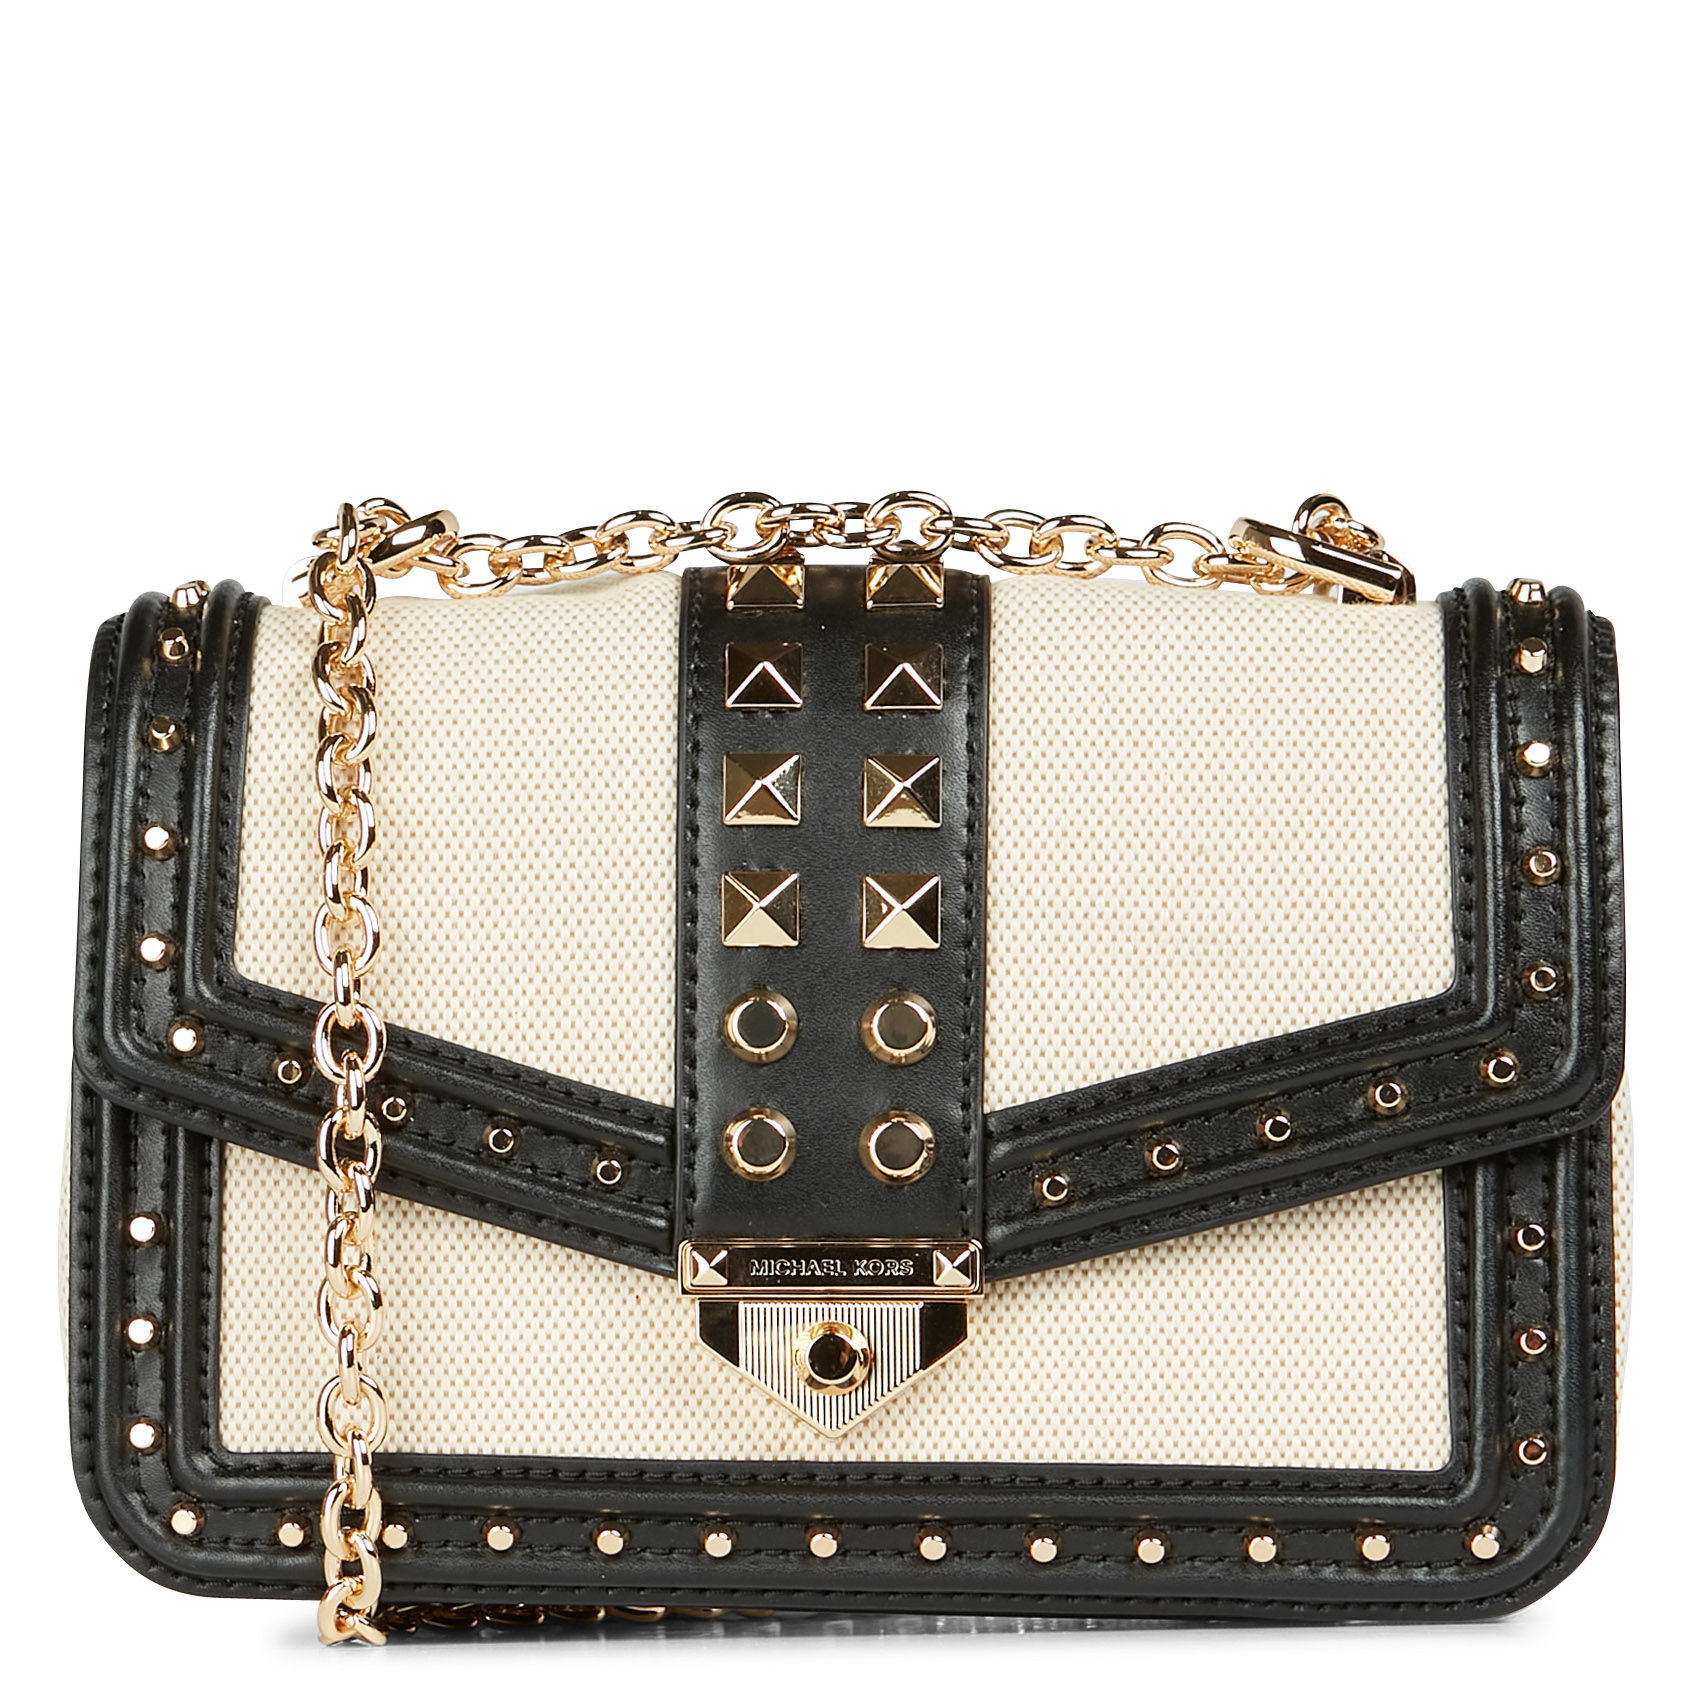 MK studded bags